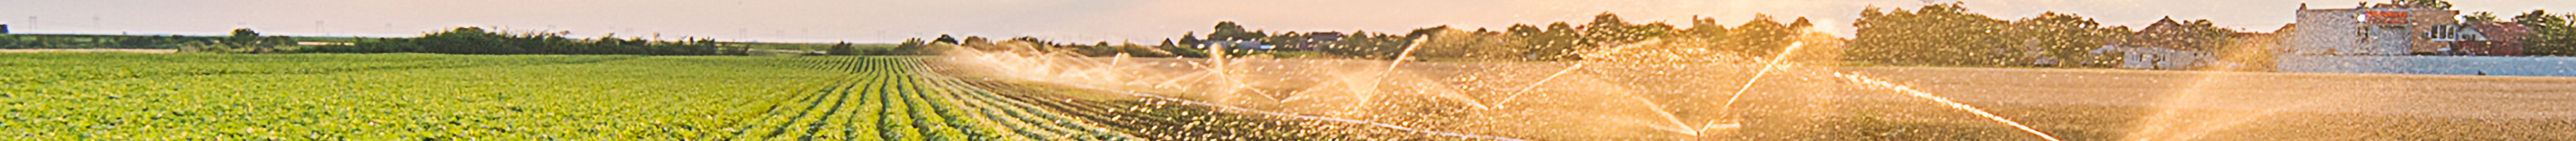 Irrigated field with a clear sky